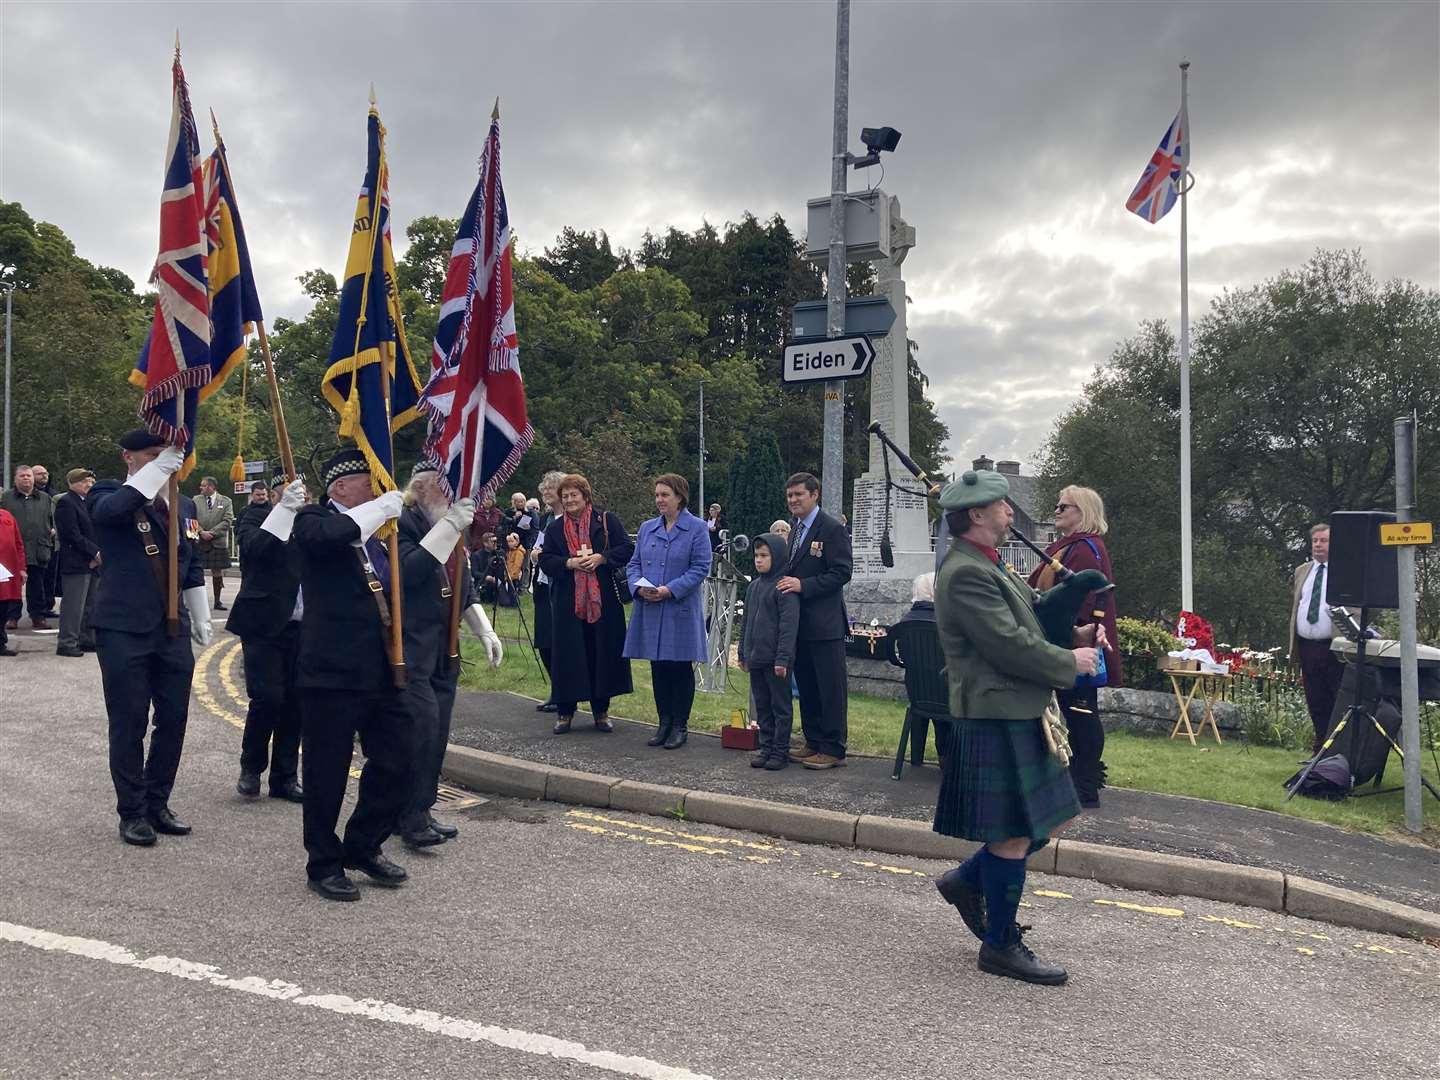 Around 80 people attended the commemoration at Rogart on Saturday, including relatives of the those whose names are inscribed on the war memorial.